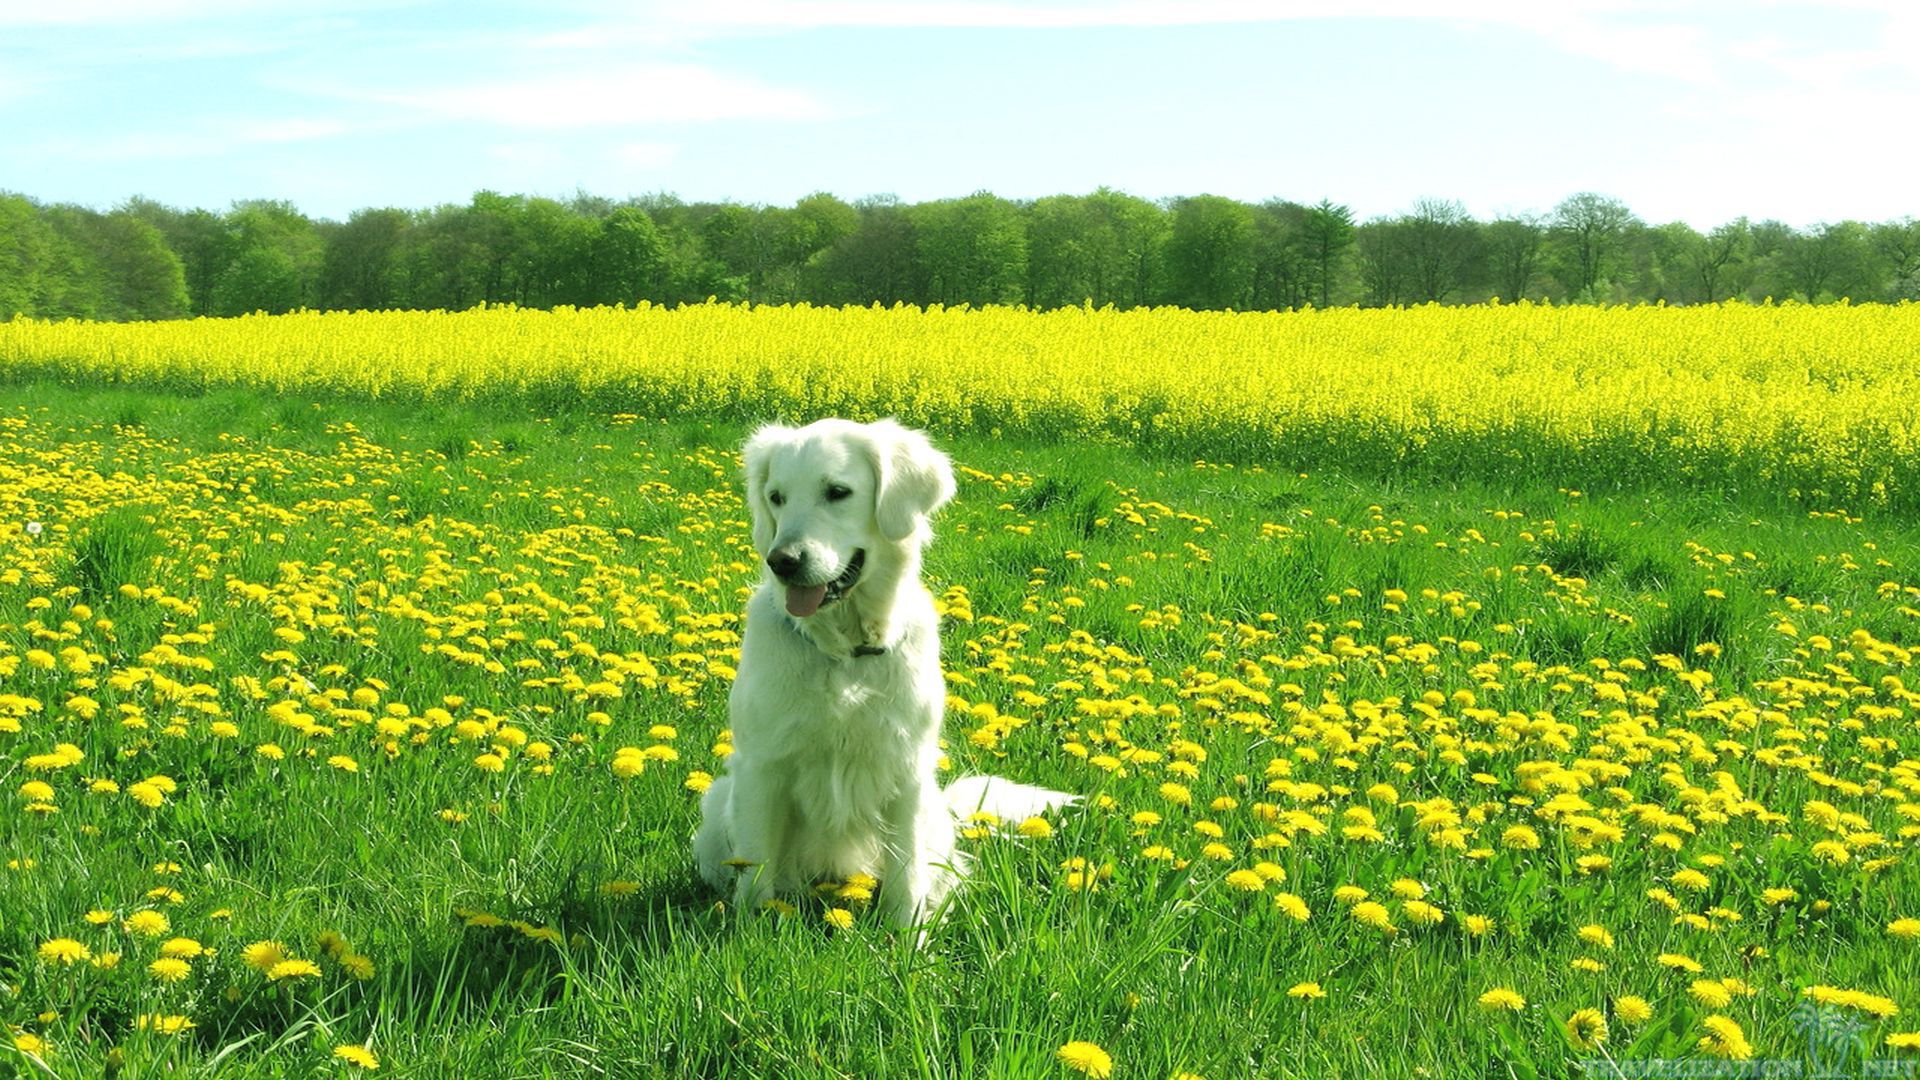 You can find Dog Dandelion Field Summer Scenes wallpapers in many resolution such as 1024×768, 1280×1024, 1366×768, ...